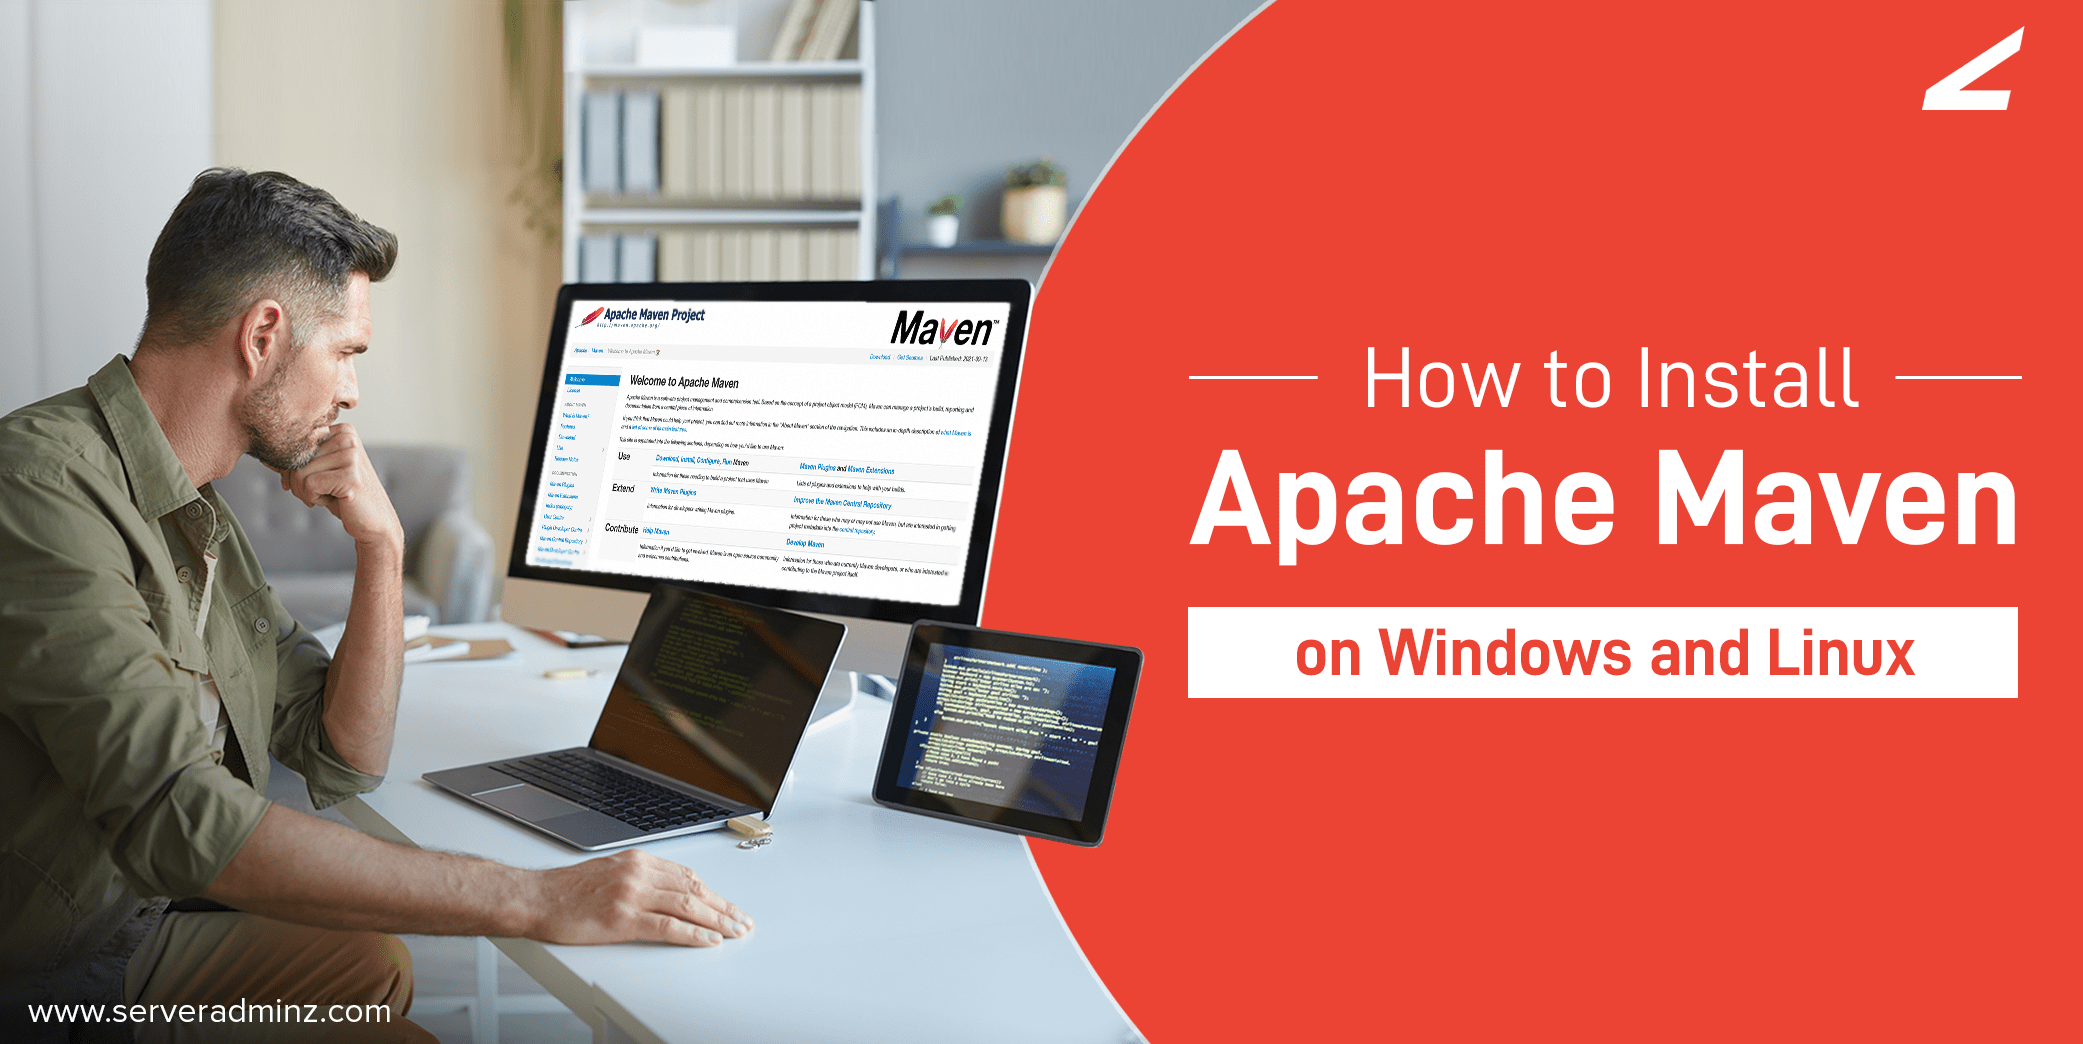 How to Install Apache Maven